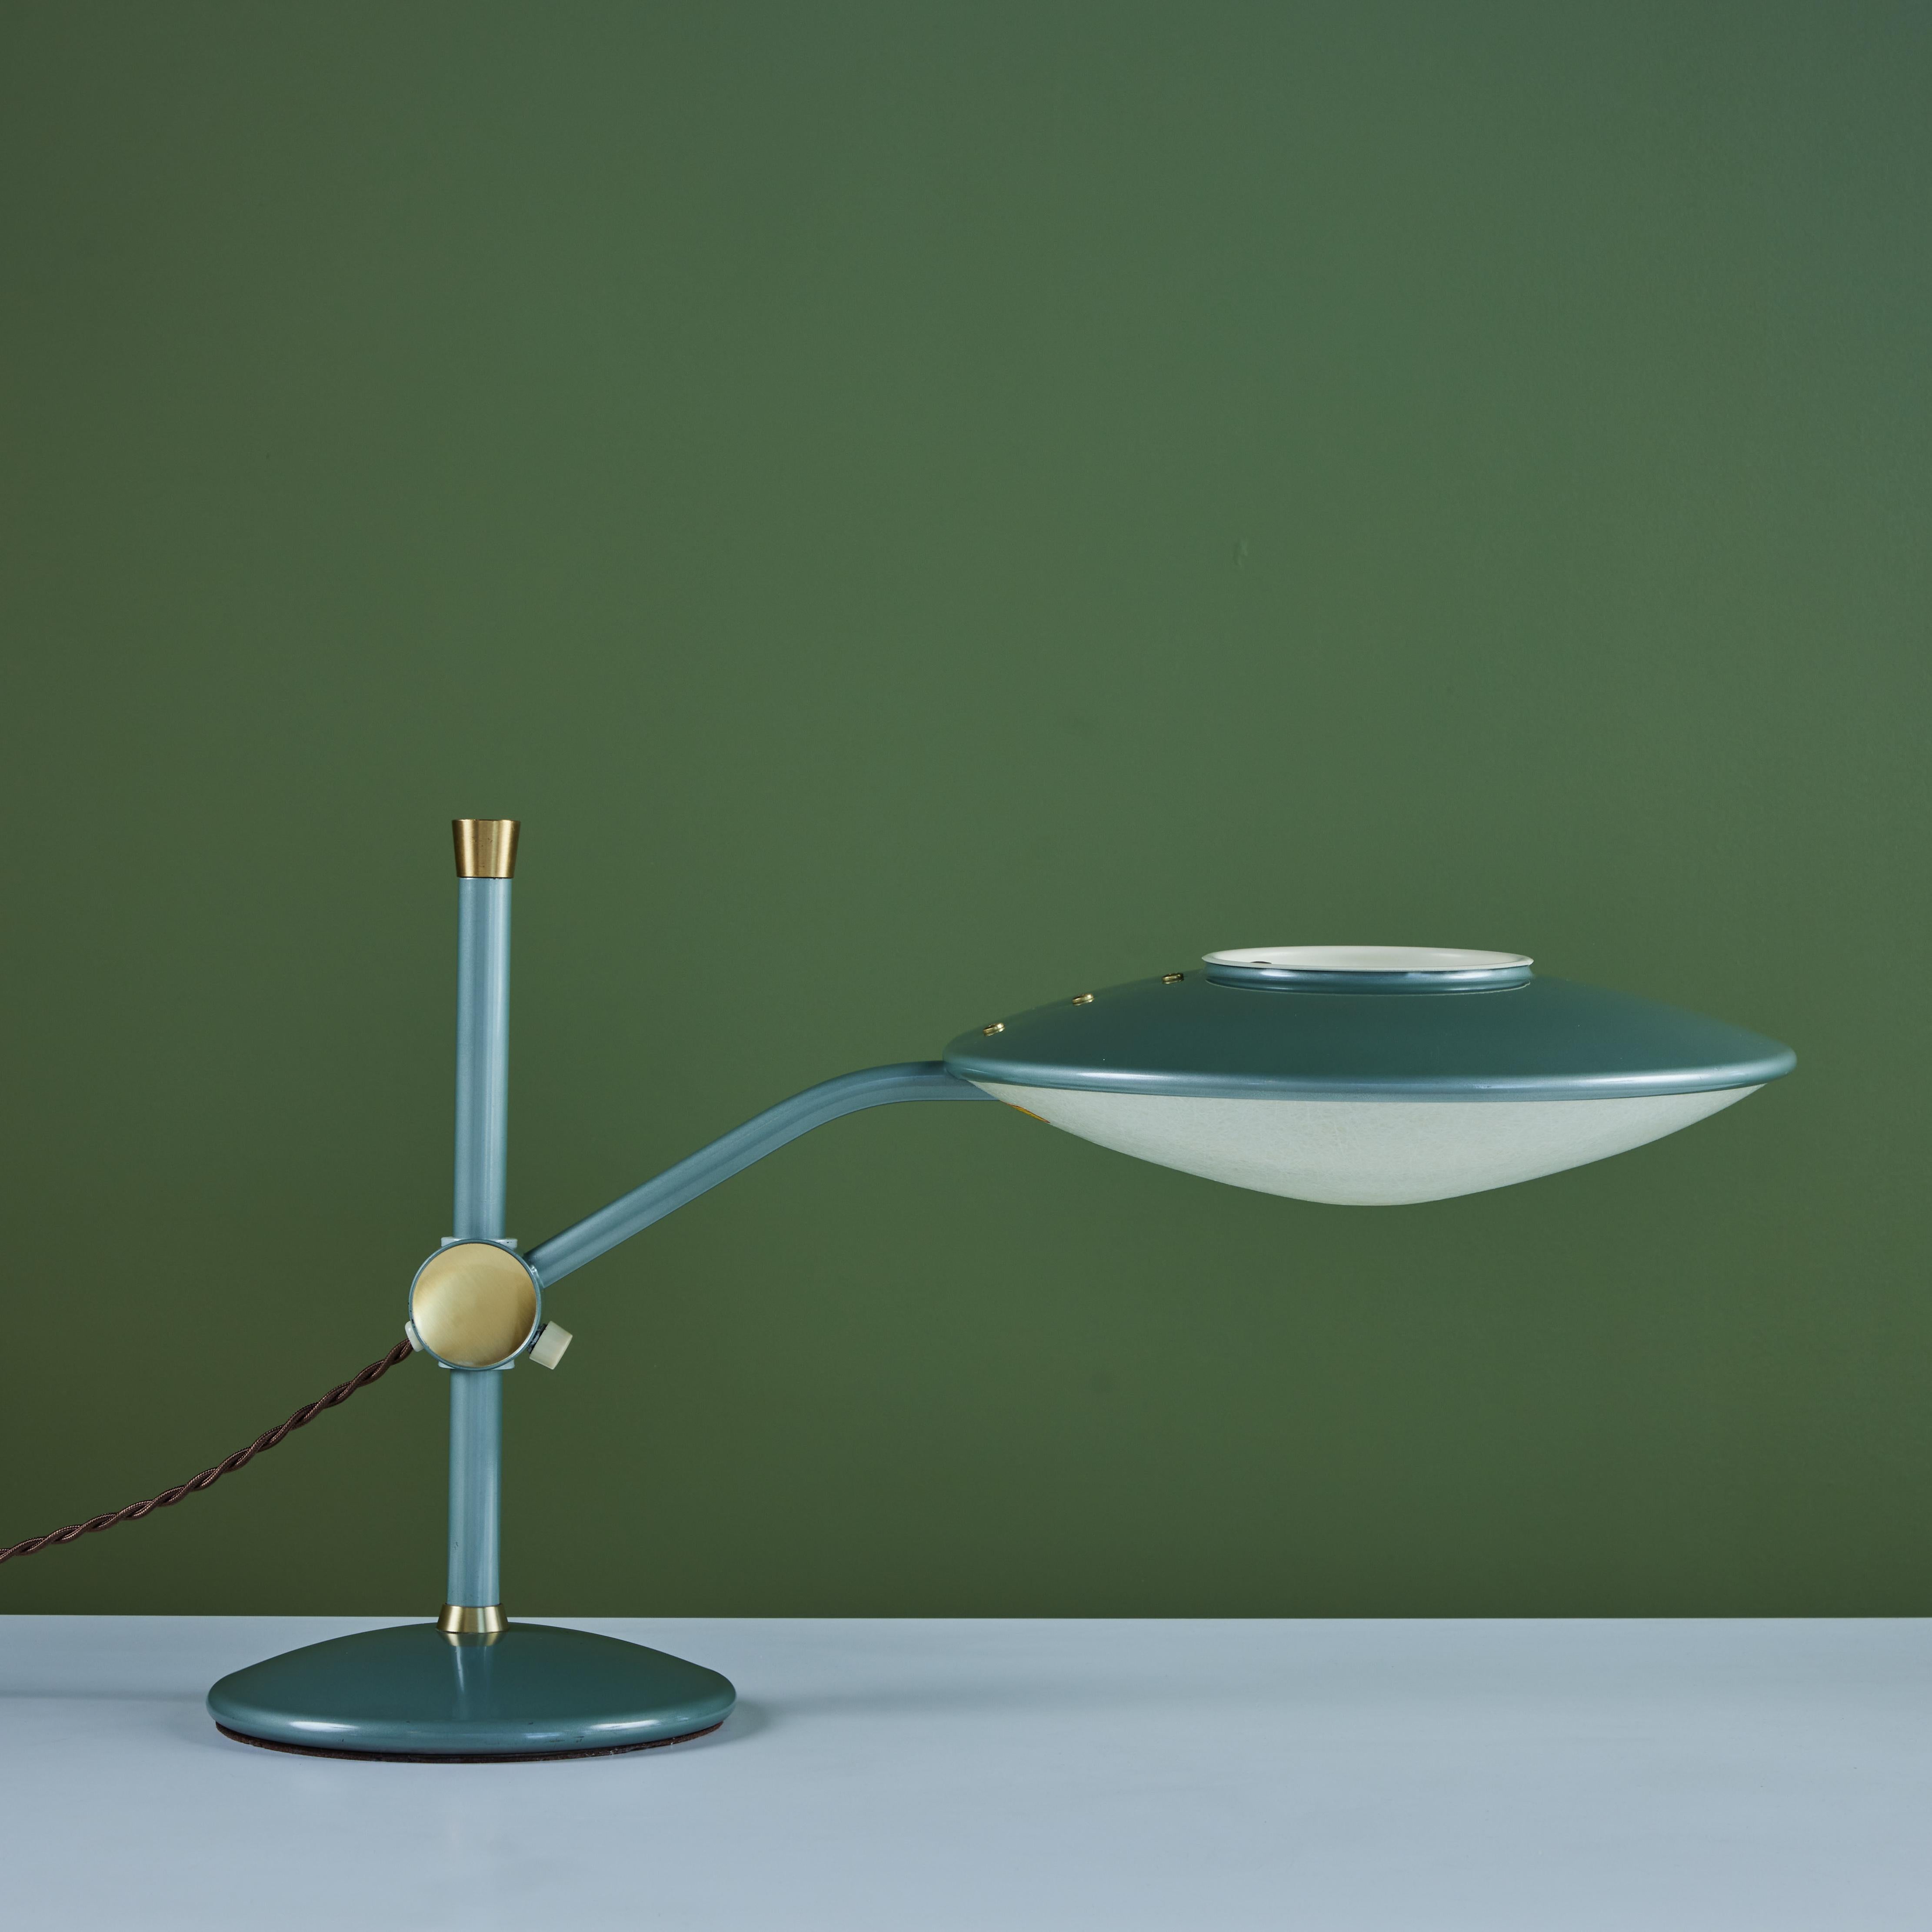 Dazor Green Enamel Desk Lamp with Brass Accents 1